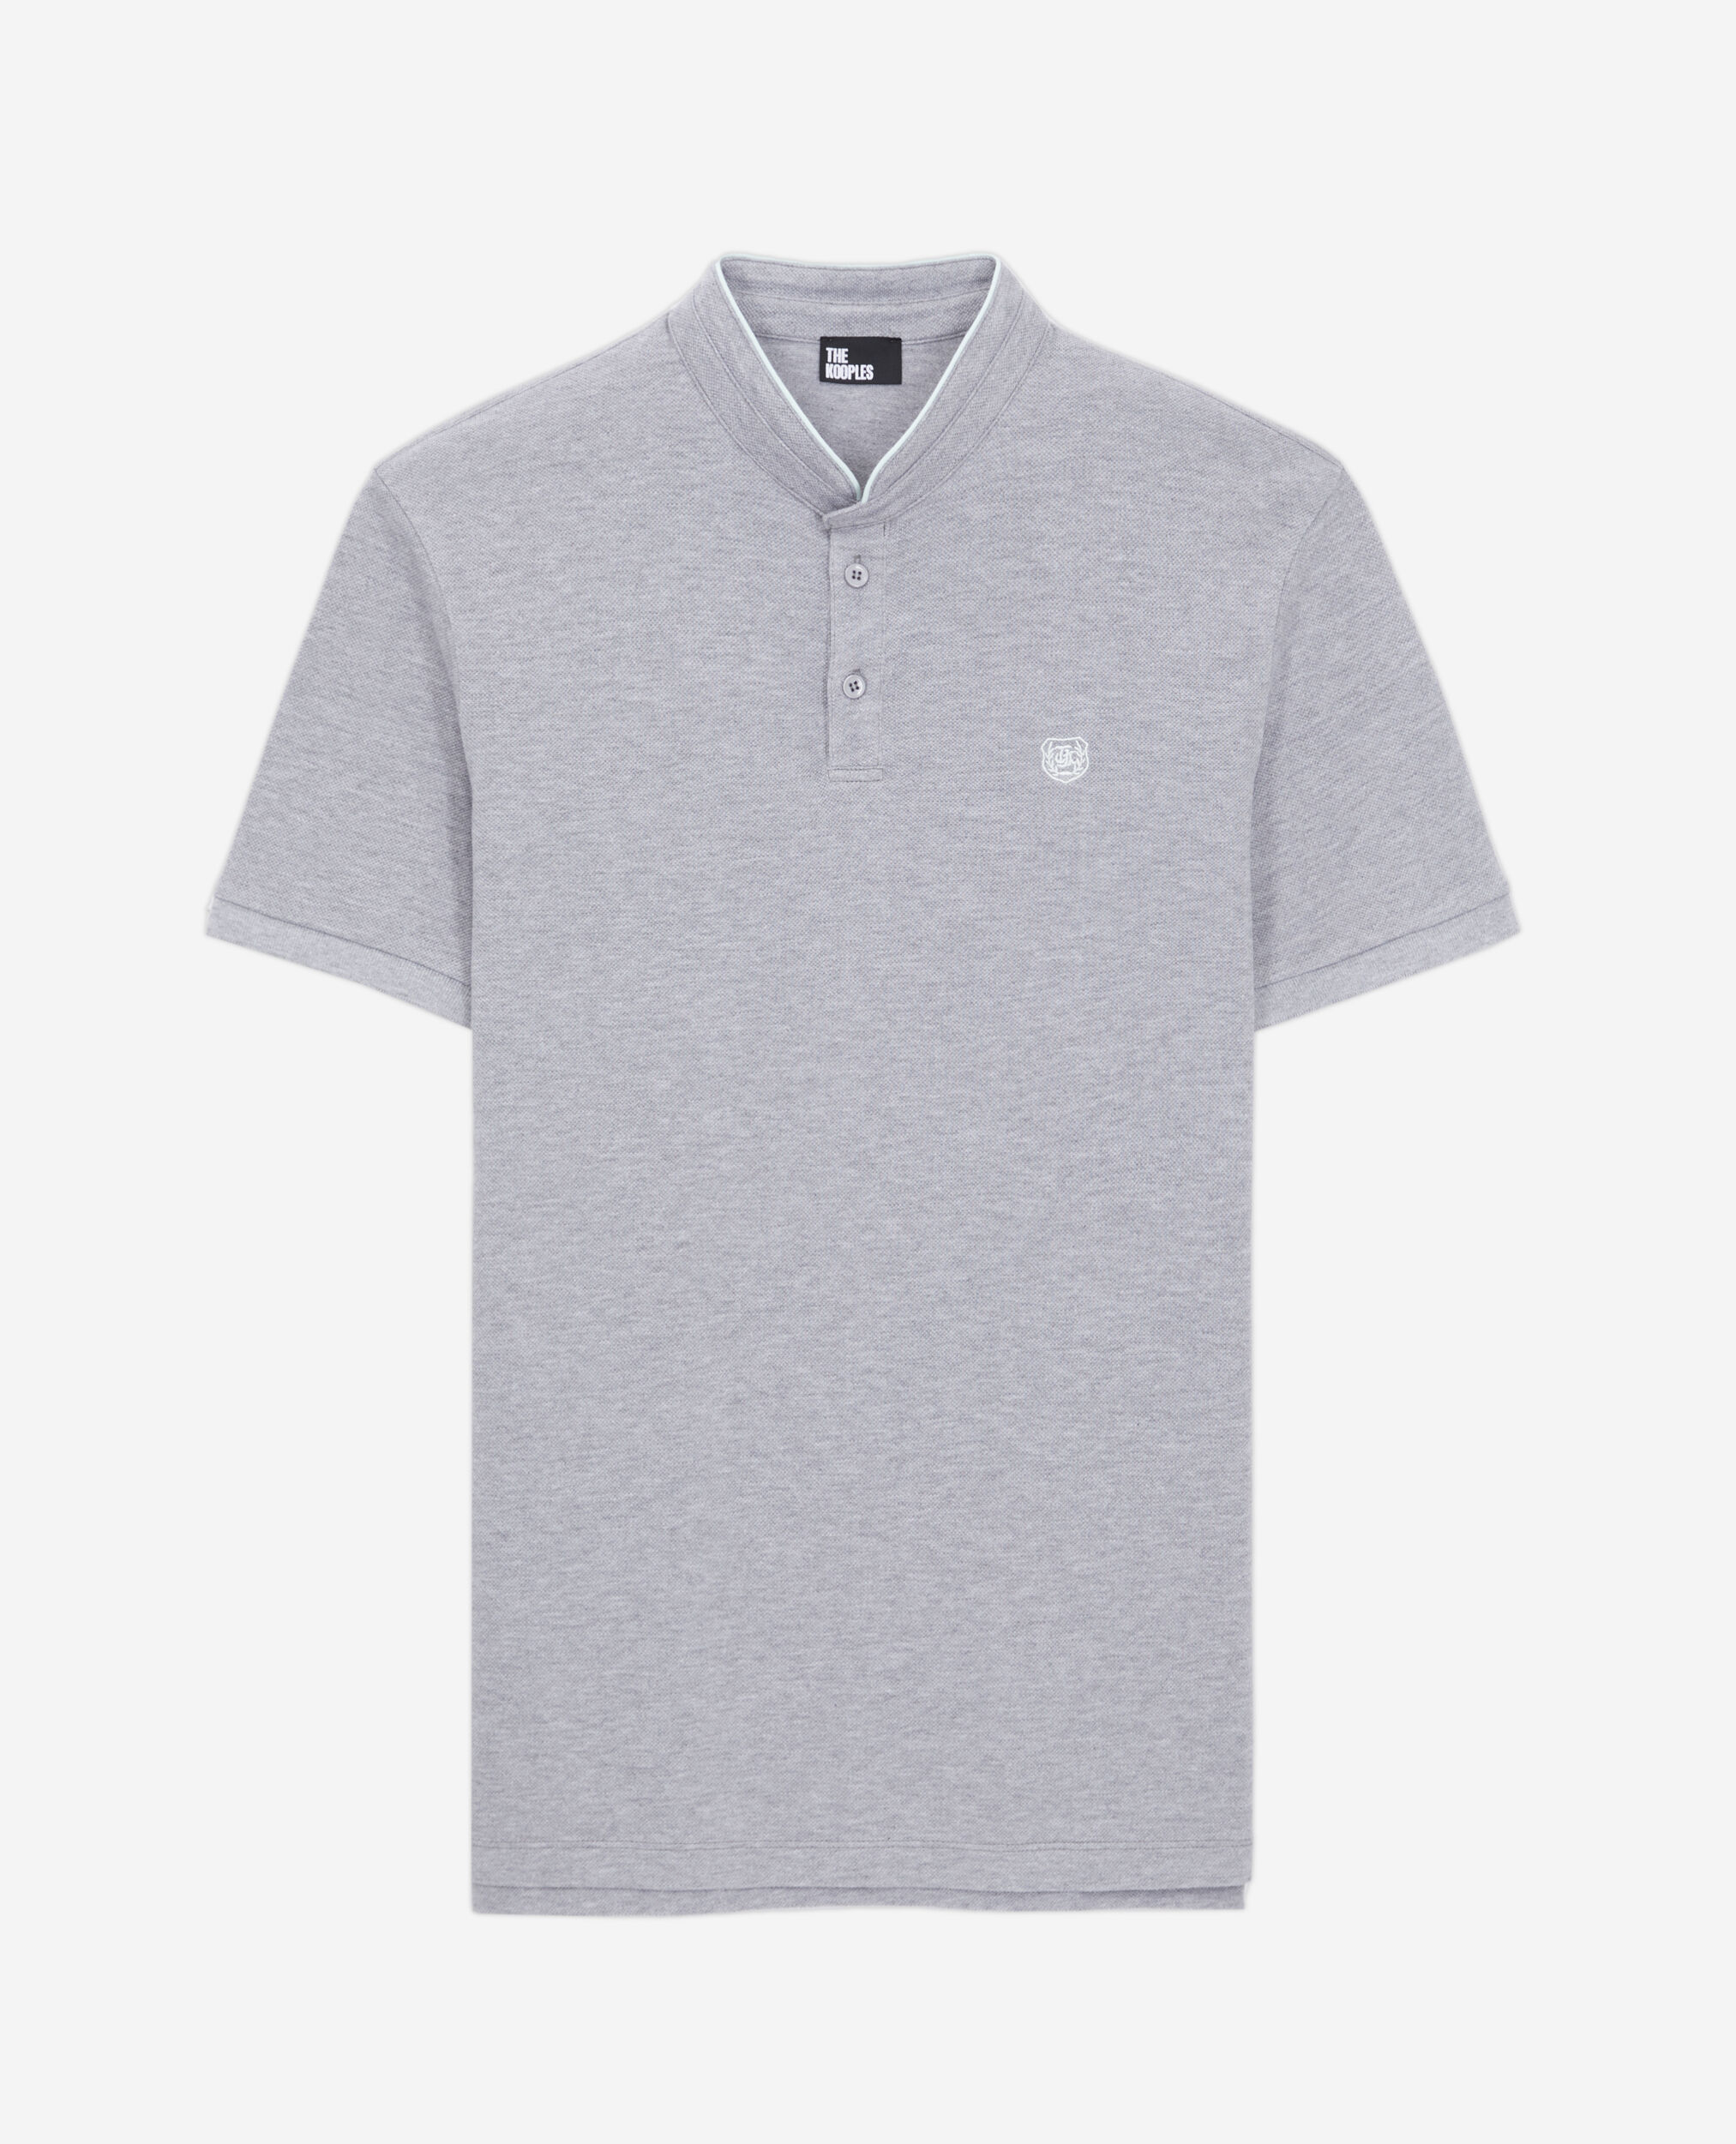 Grey cotton polo t-shirt, GREY / GREEN, hi-res image number null